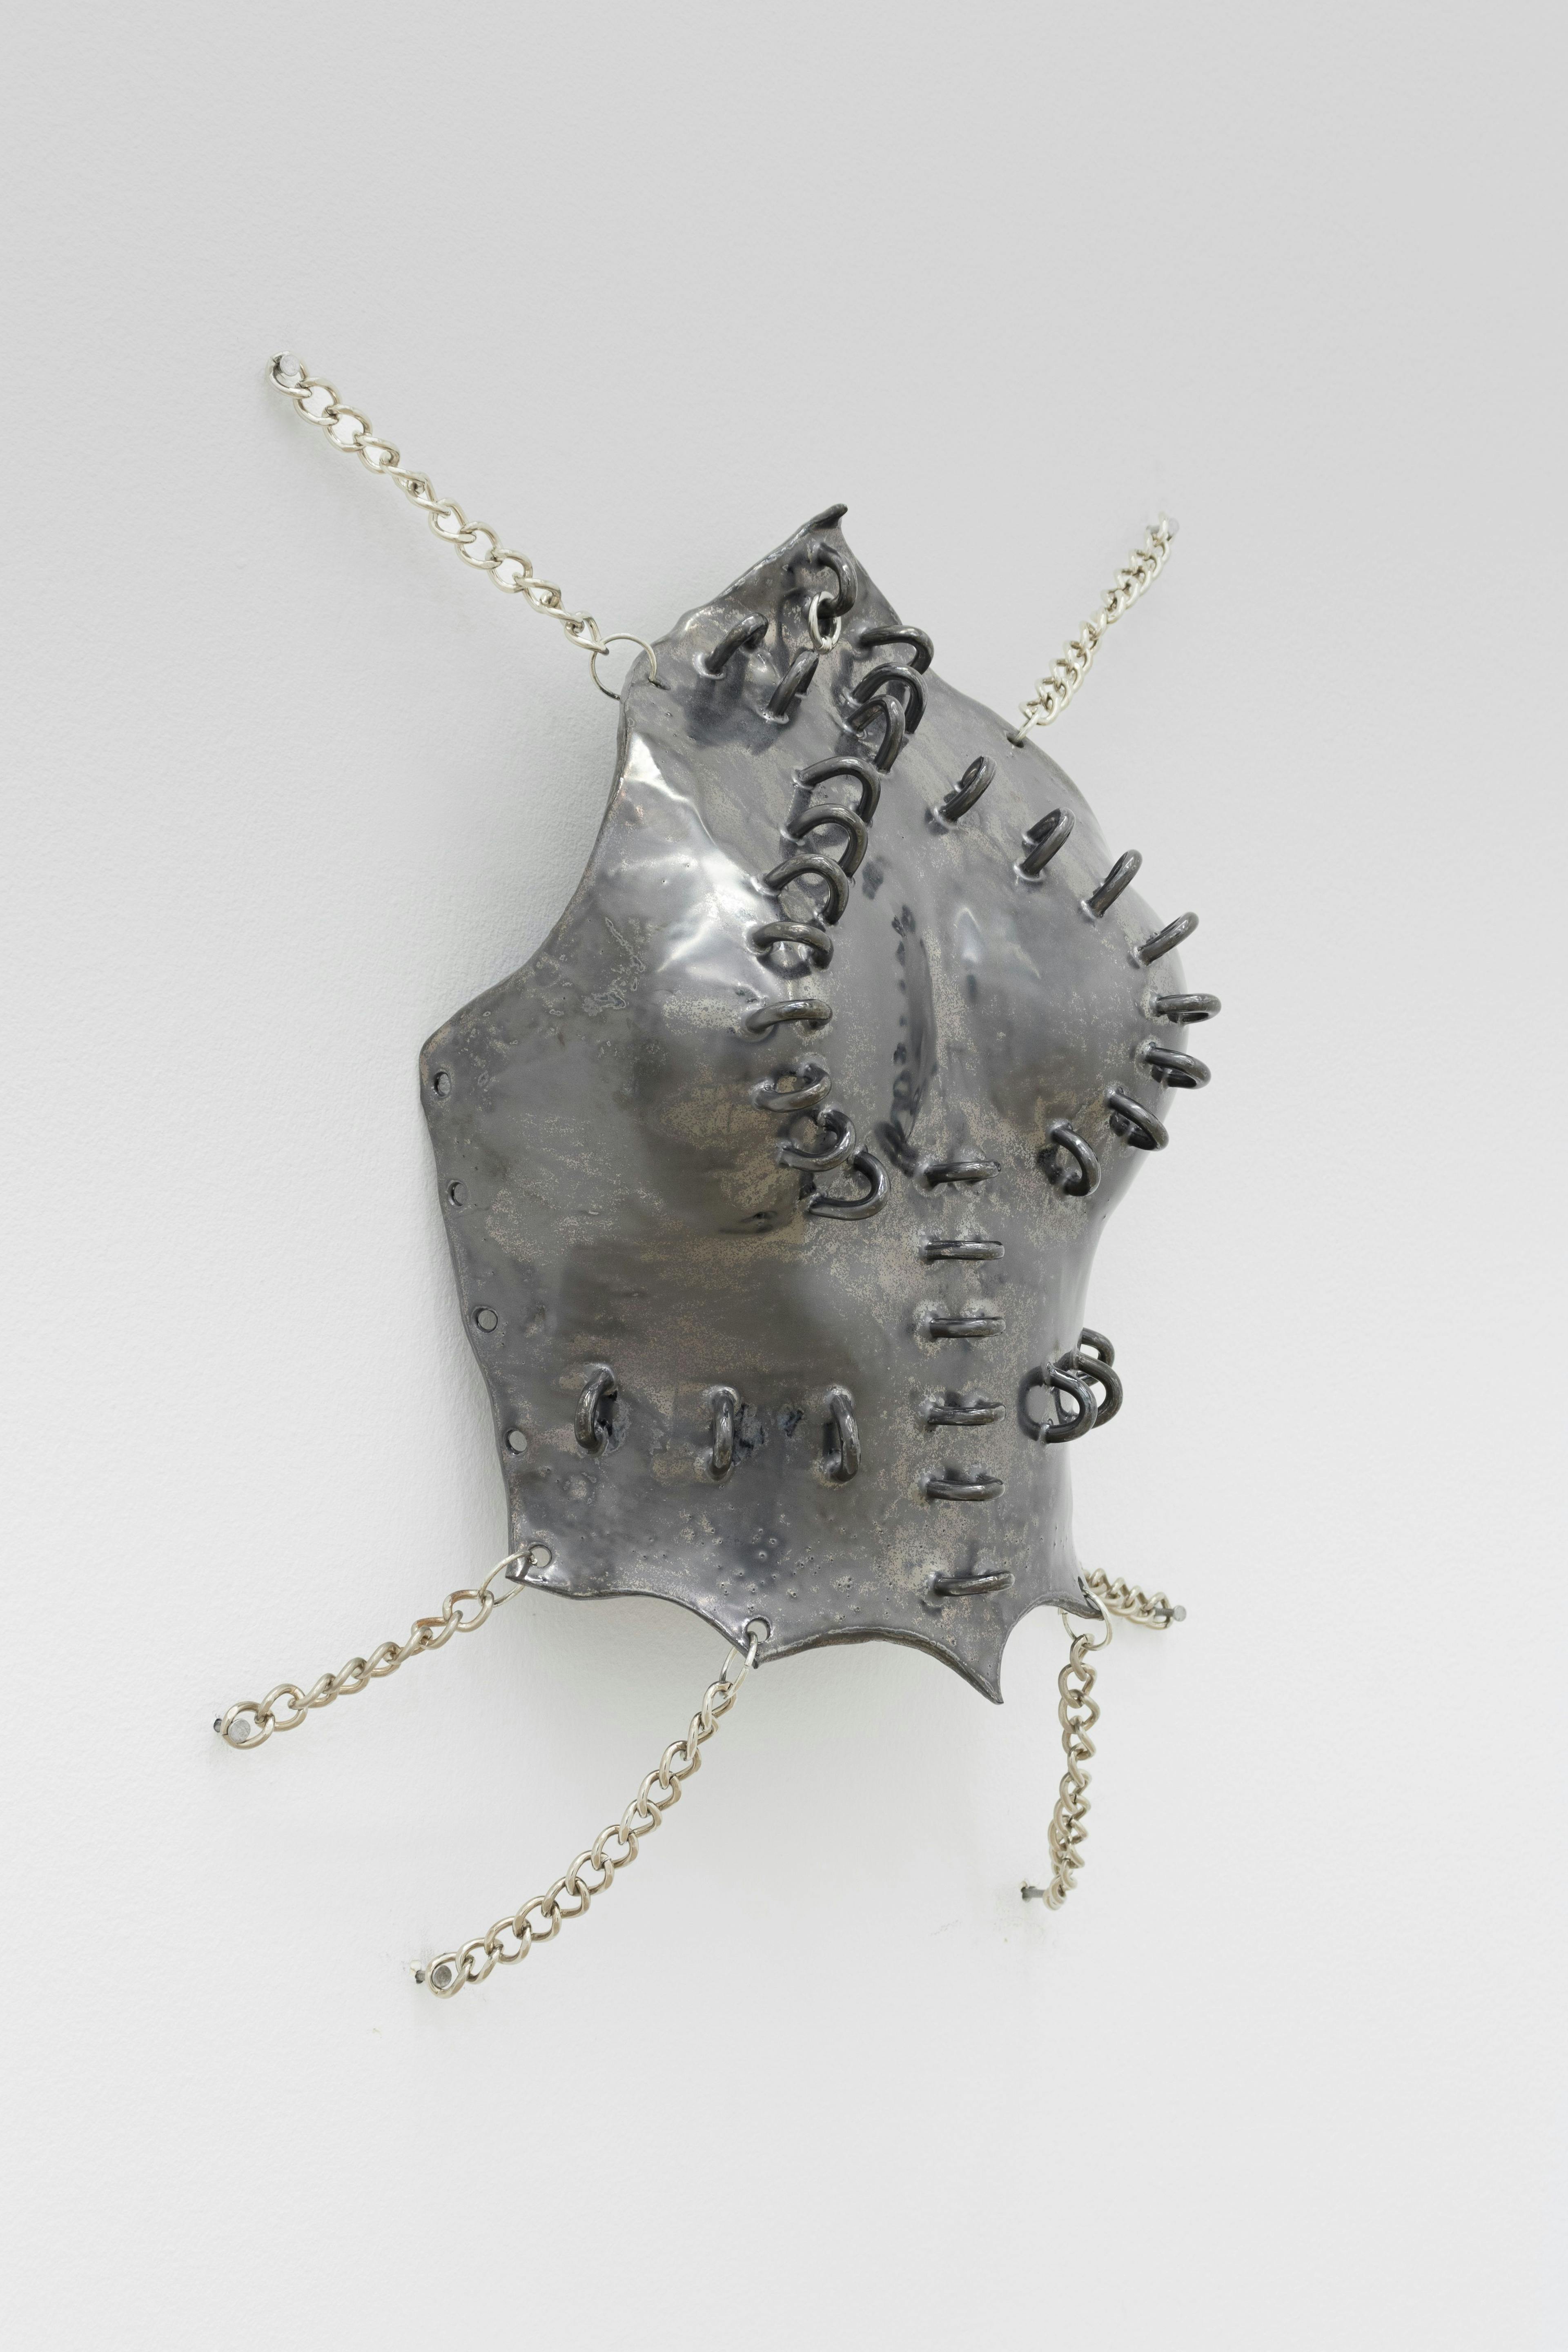 Breastplate 1, 2023

glazed stoneware, stainless steel jewelry

18 x 15 x 5 inches